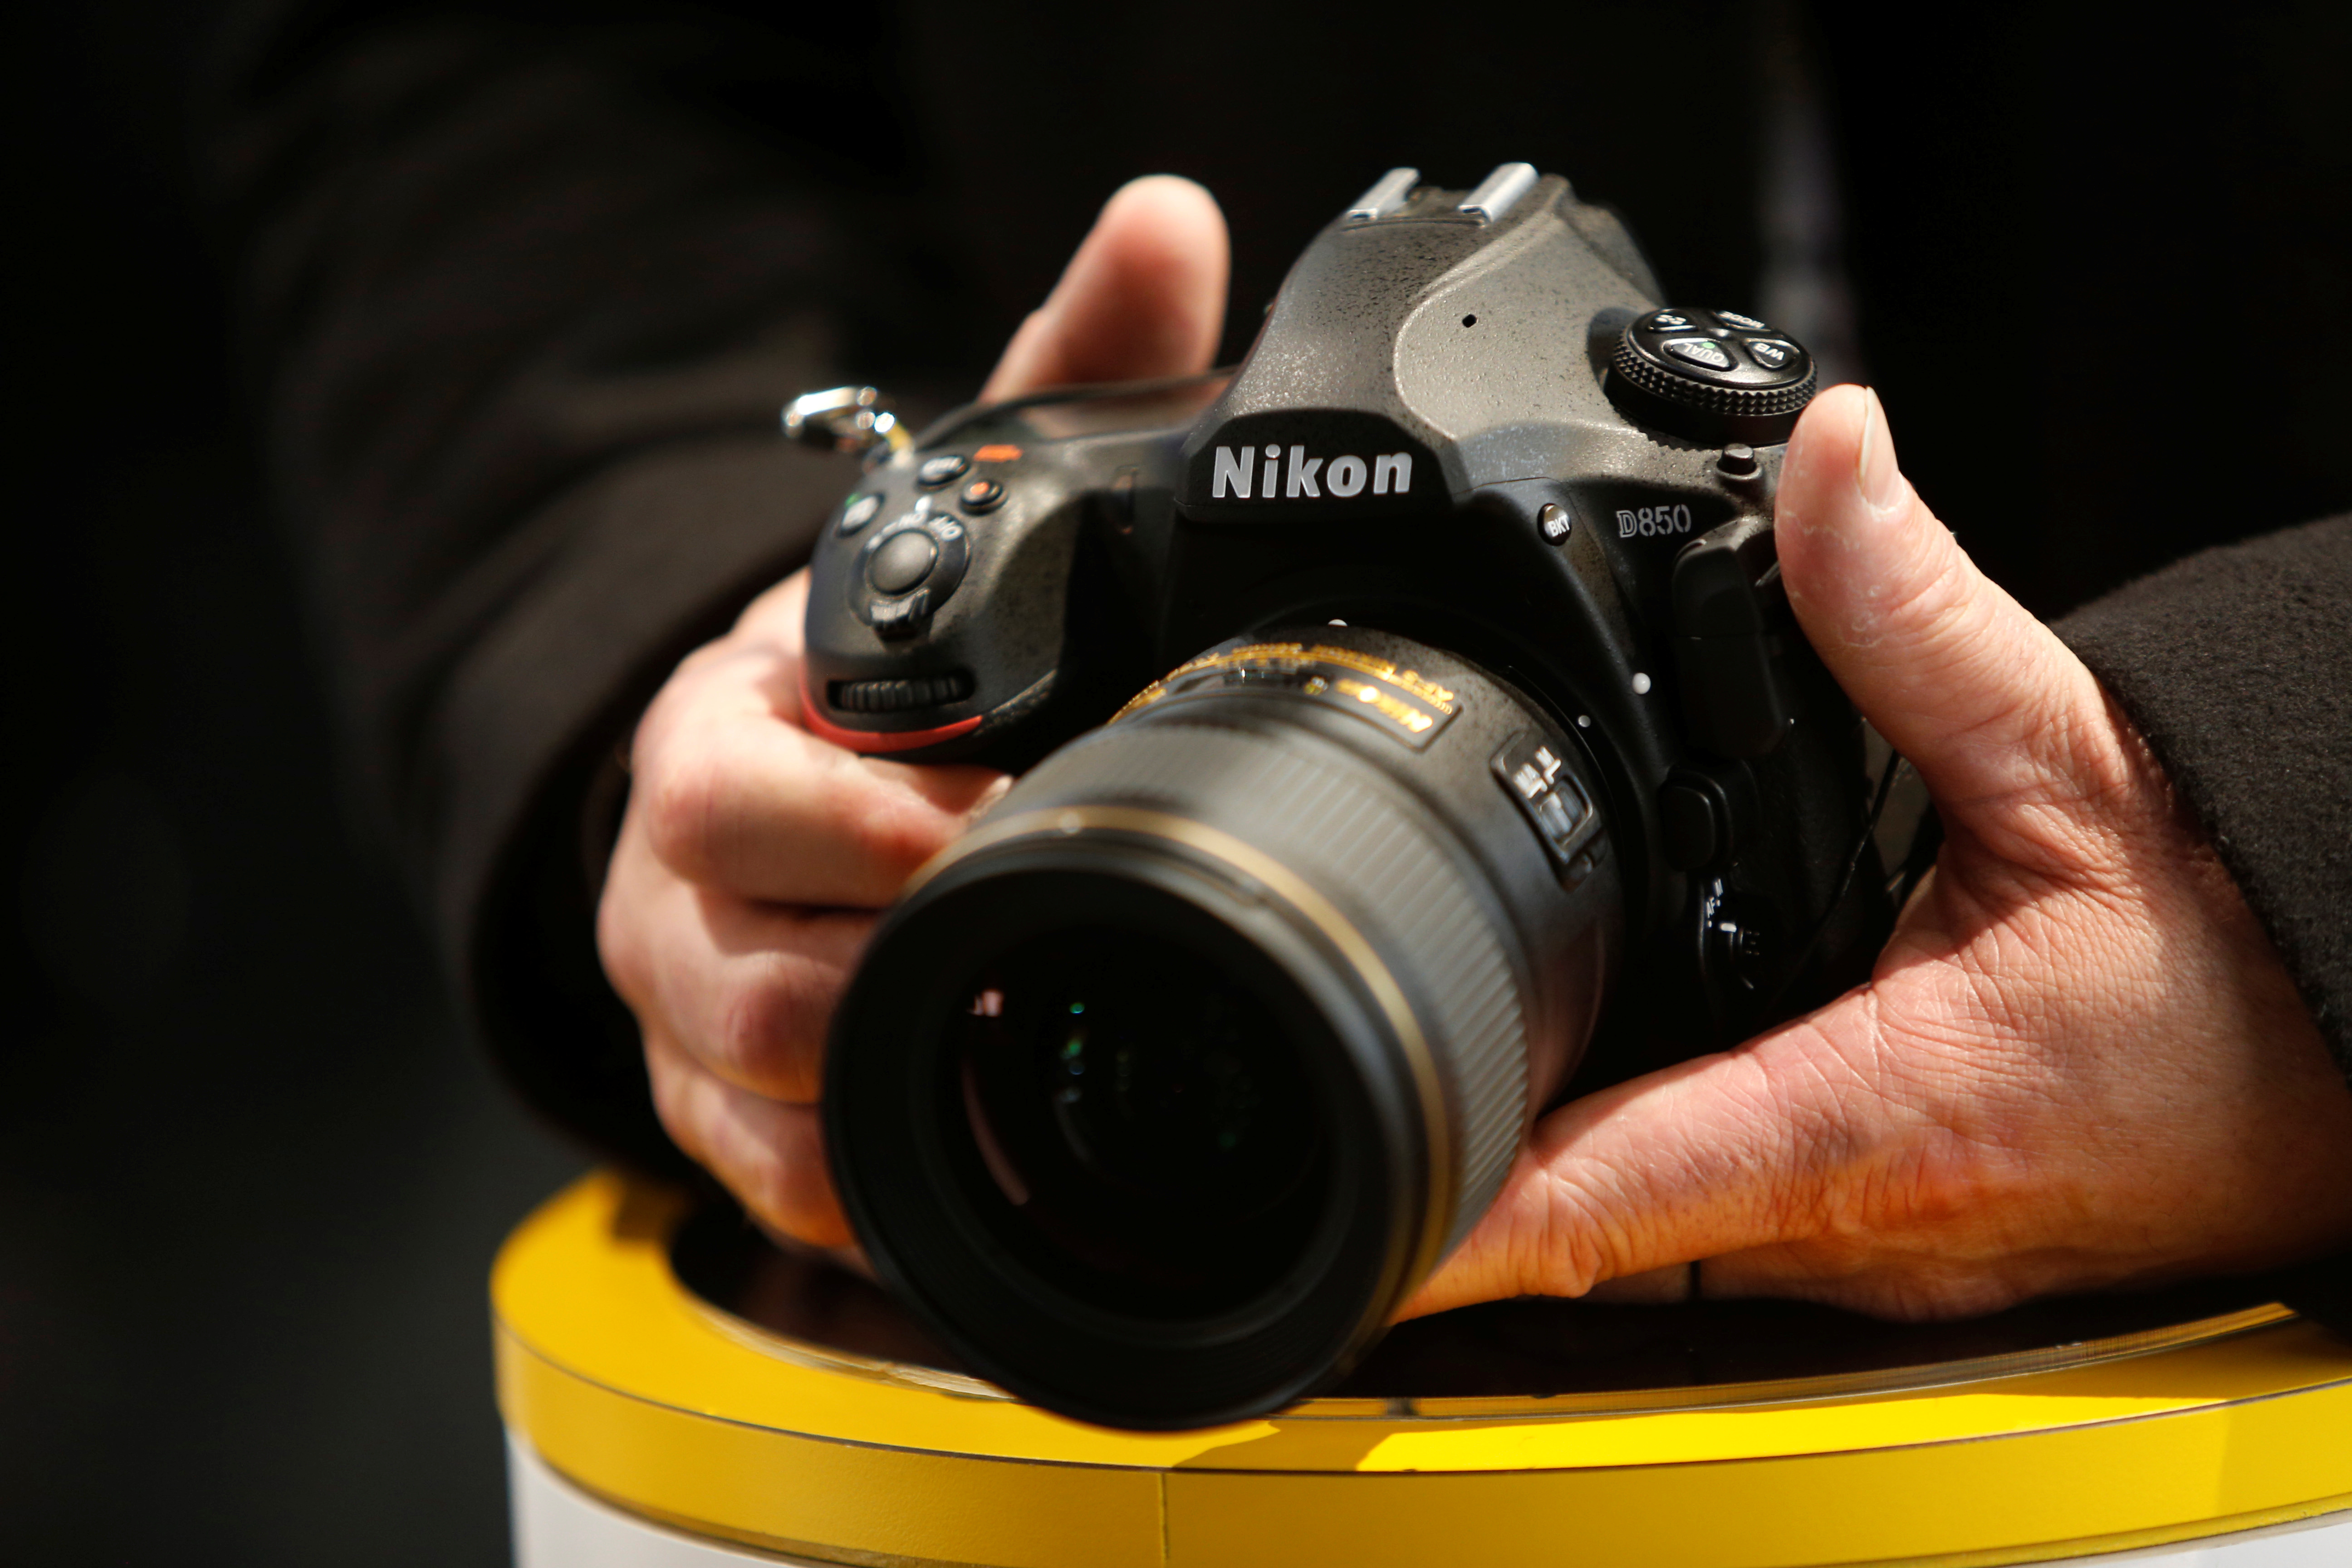 An attendee checks out the Nikon D850 digital camera during the 2018 CES in Las Vegas